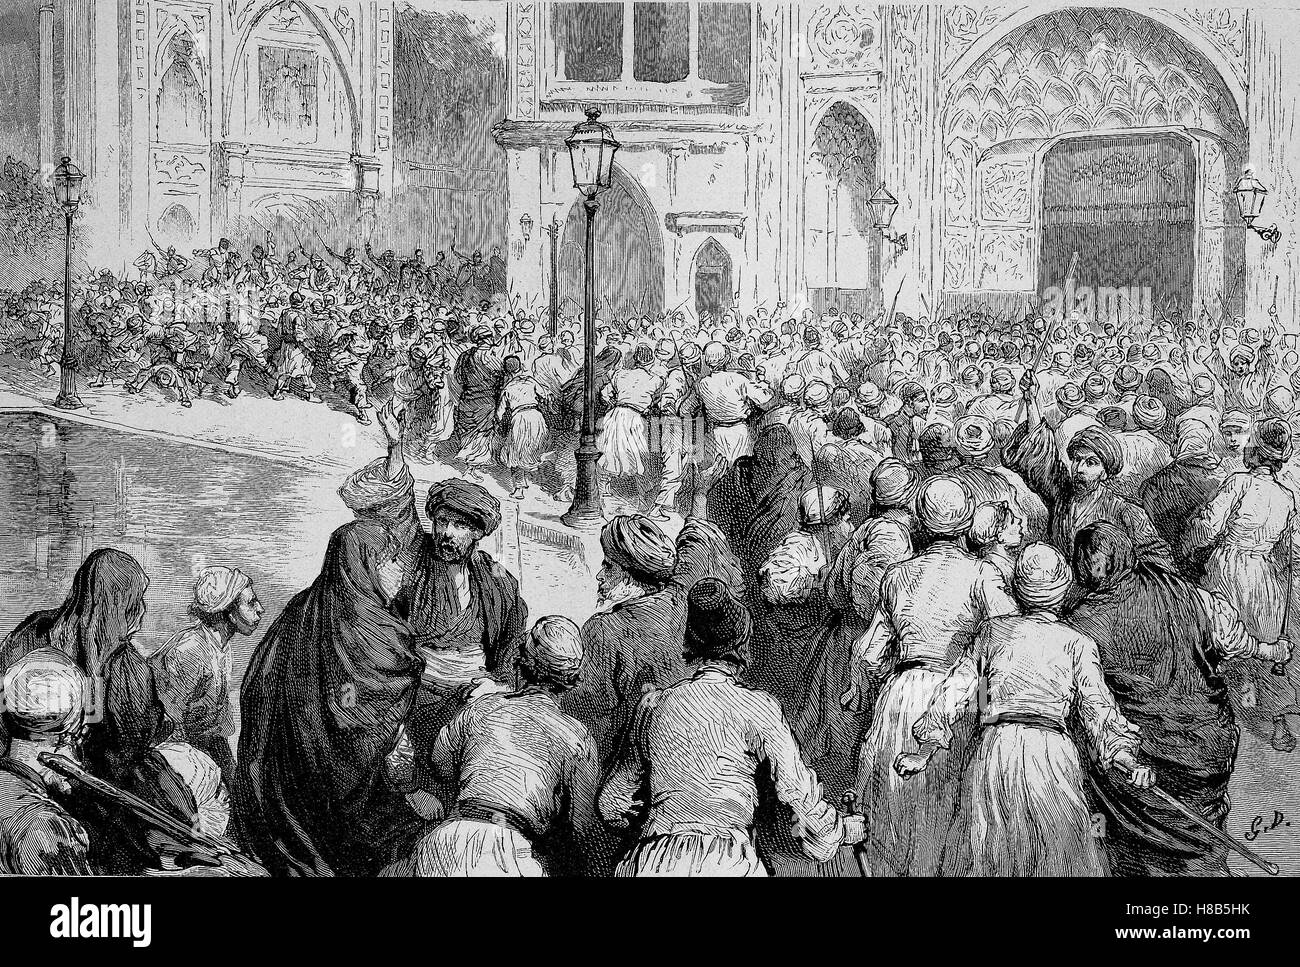 The tobacco revolt in Persia. Crowd in front of the palace of the Shah ...